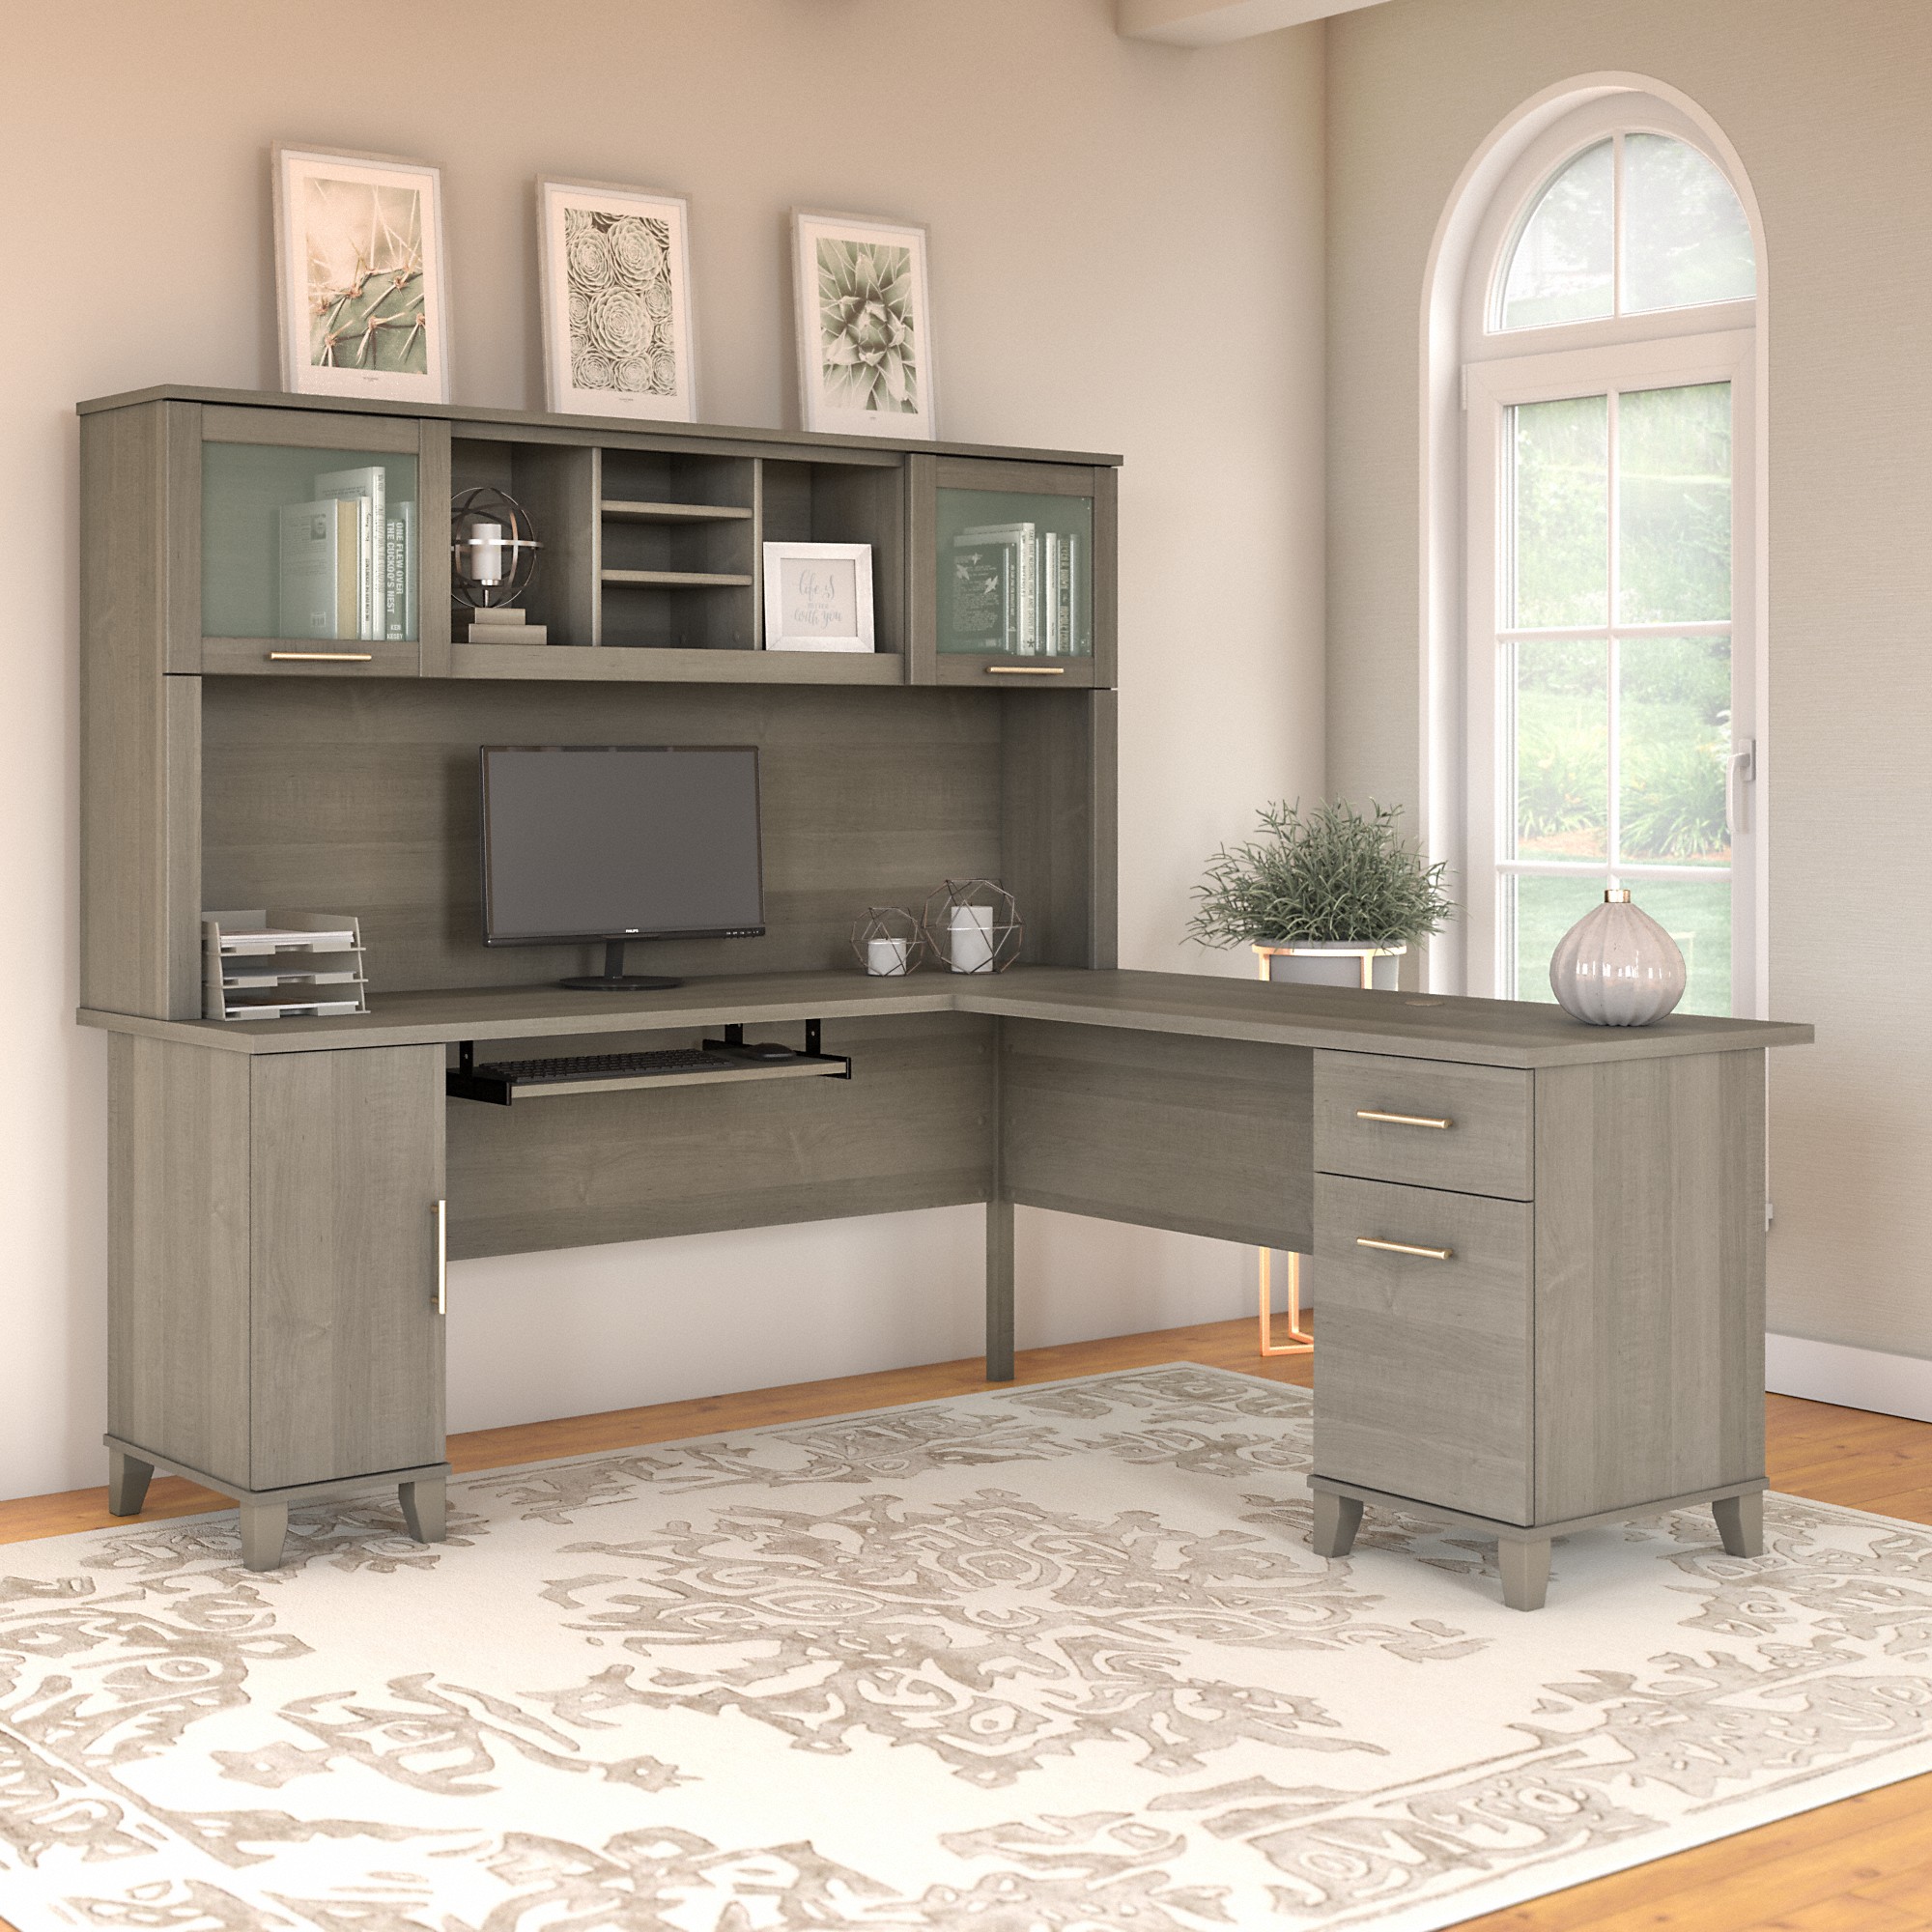 Bush Furniture Somerset 72" L Desk and Hutch with Storage, Ash Gray - image 2 of 5